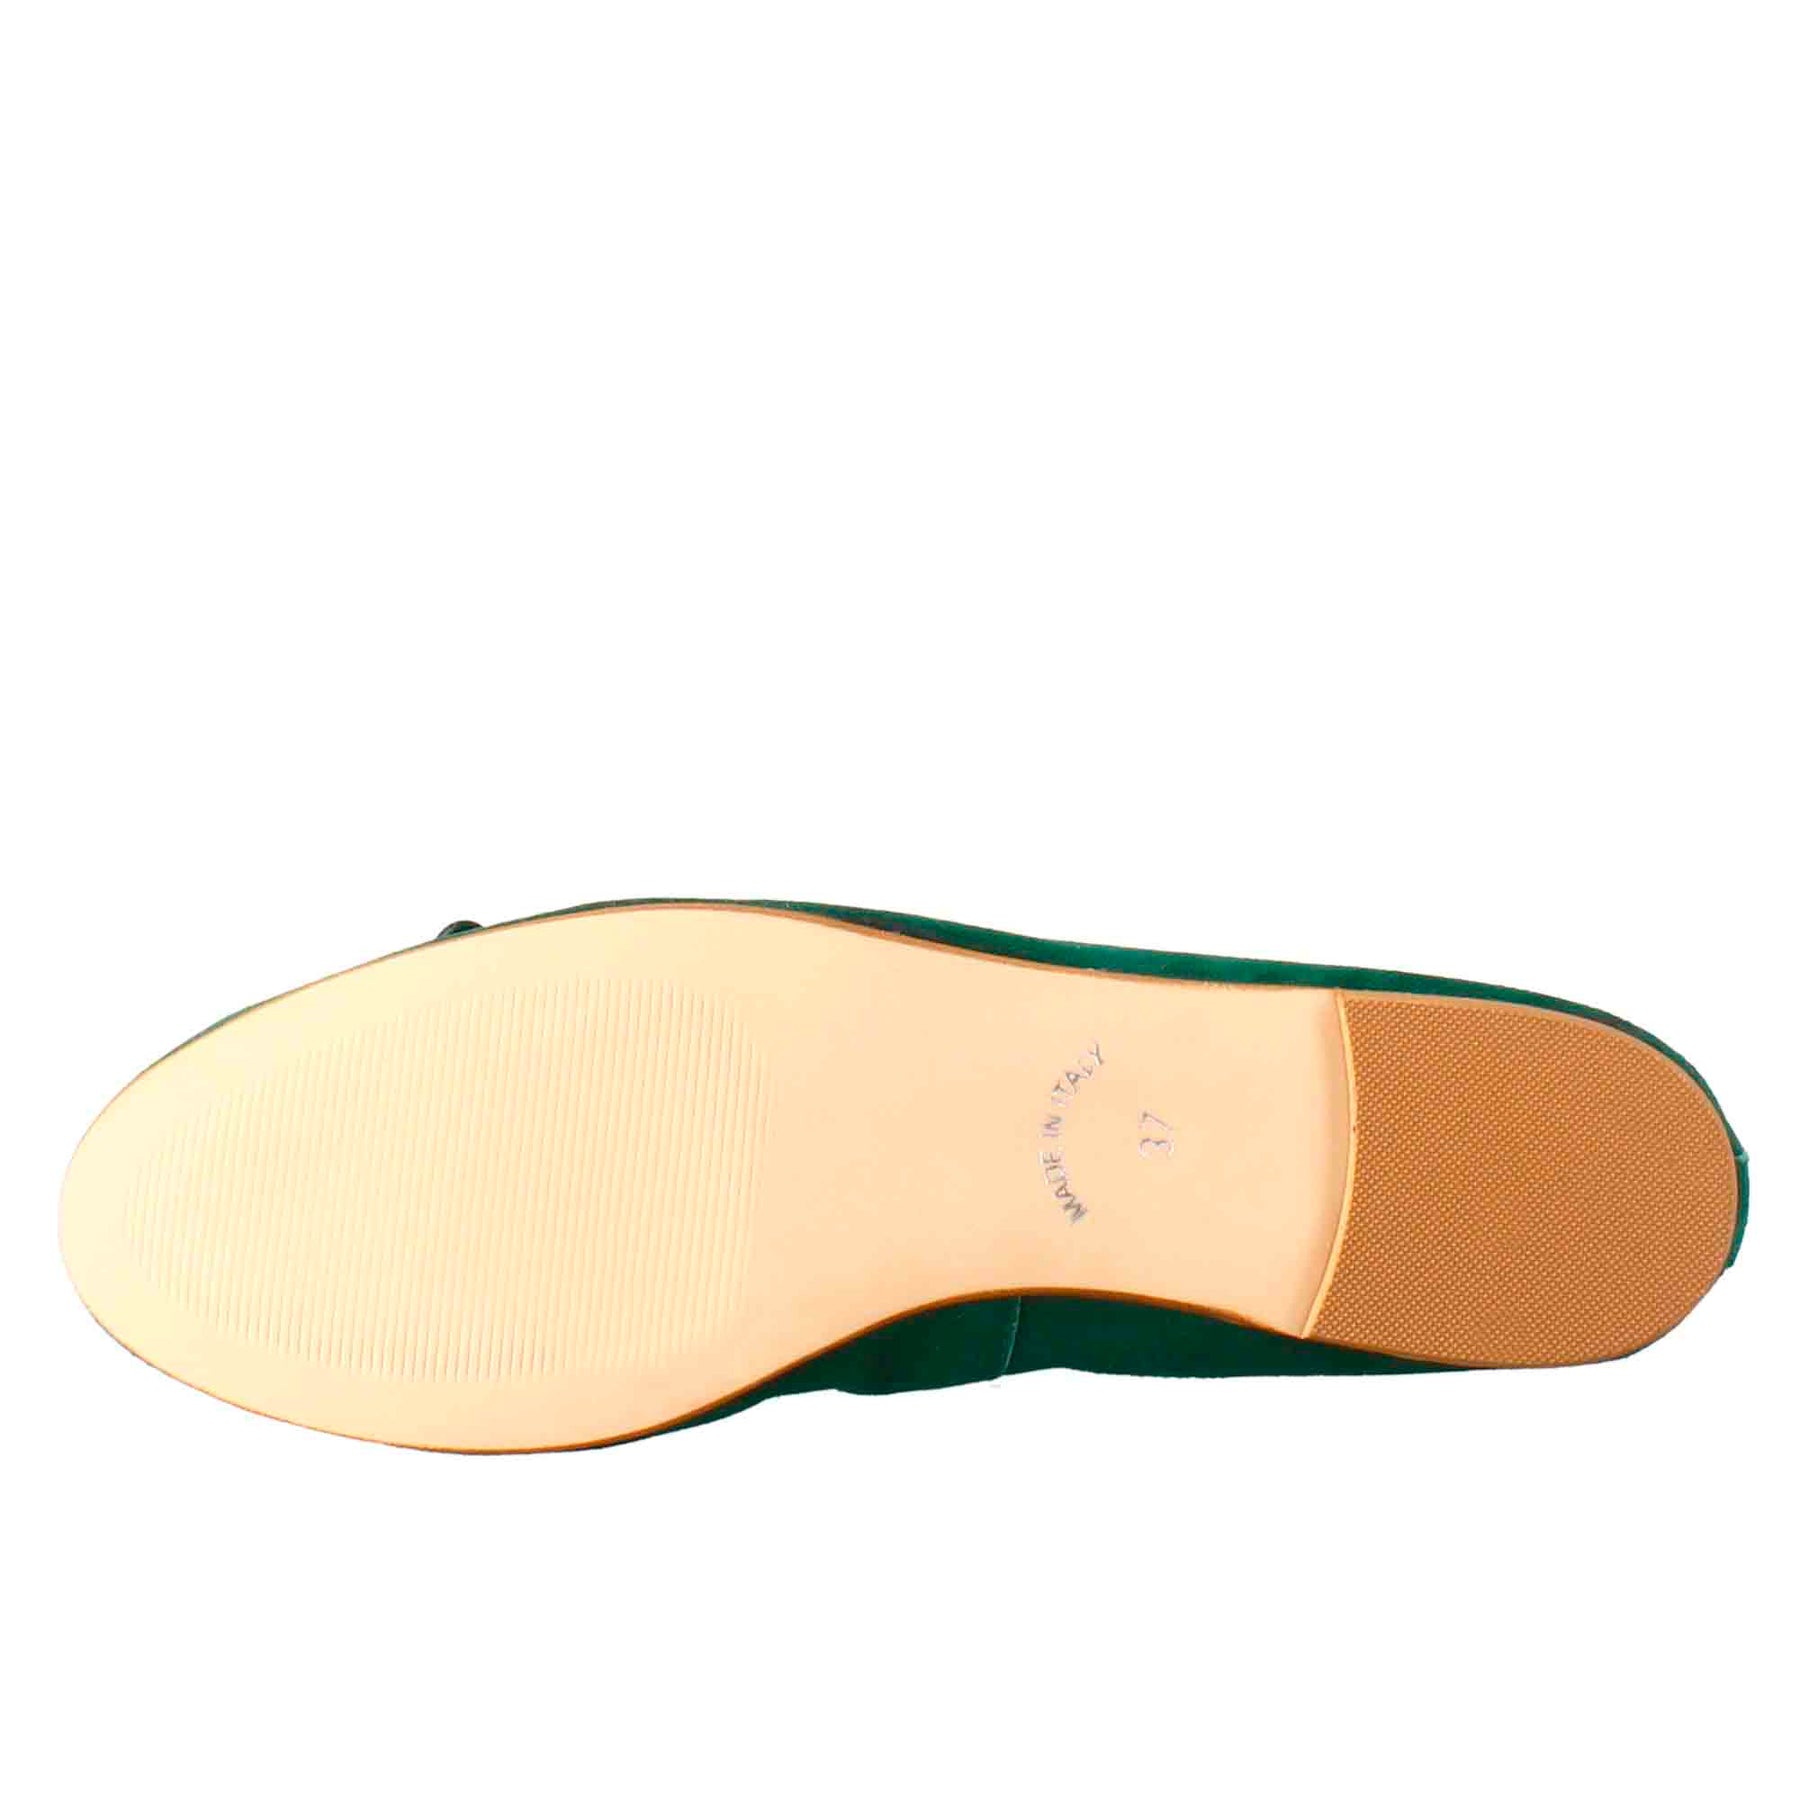 Light green suede women's ballet flats without lining